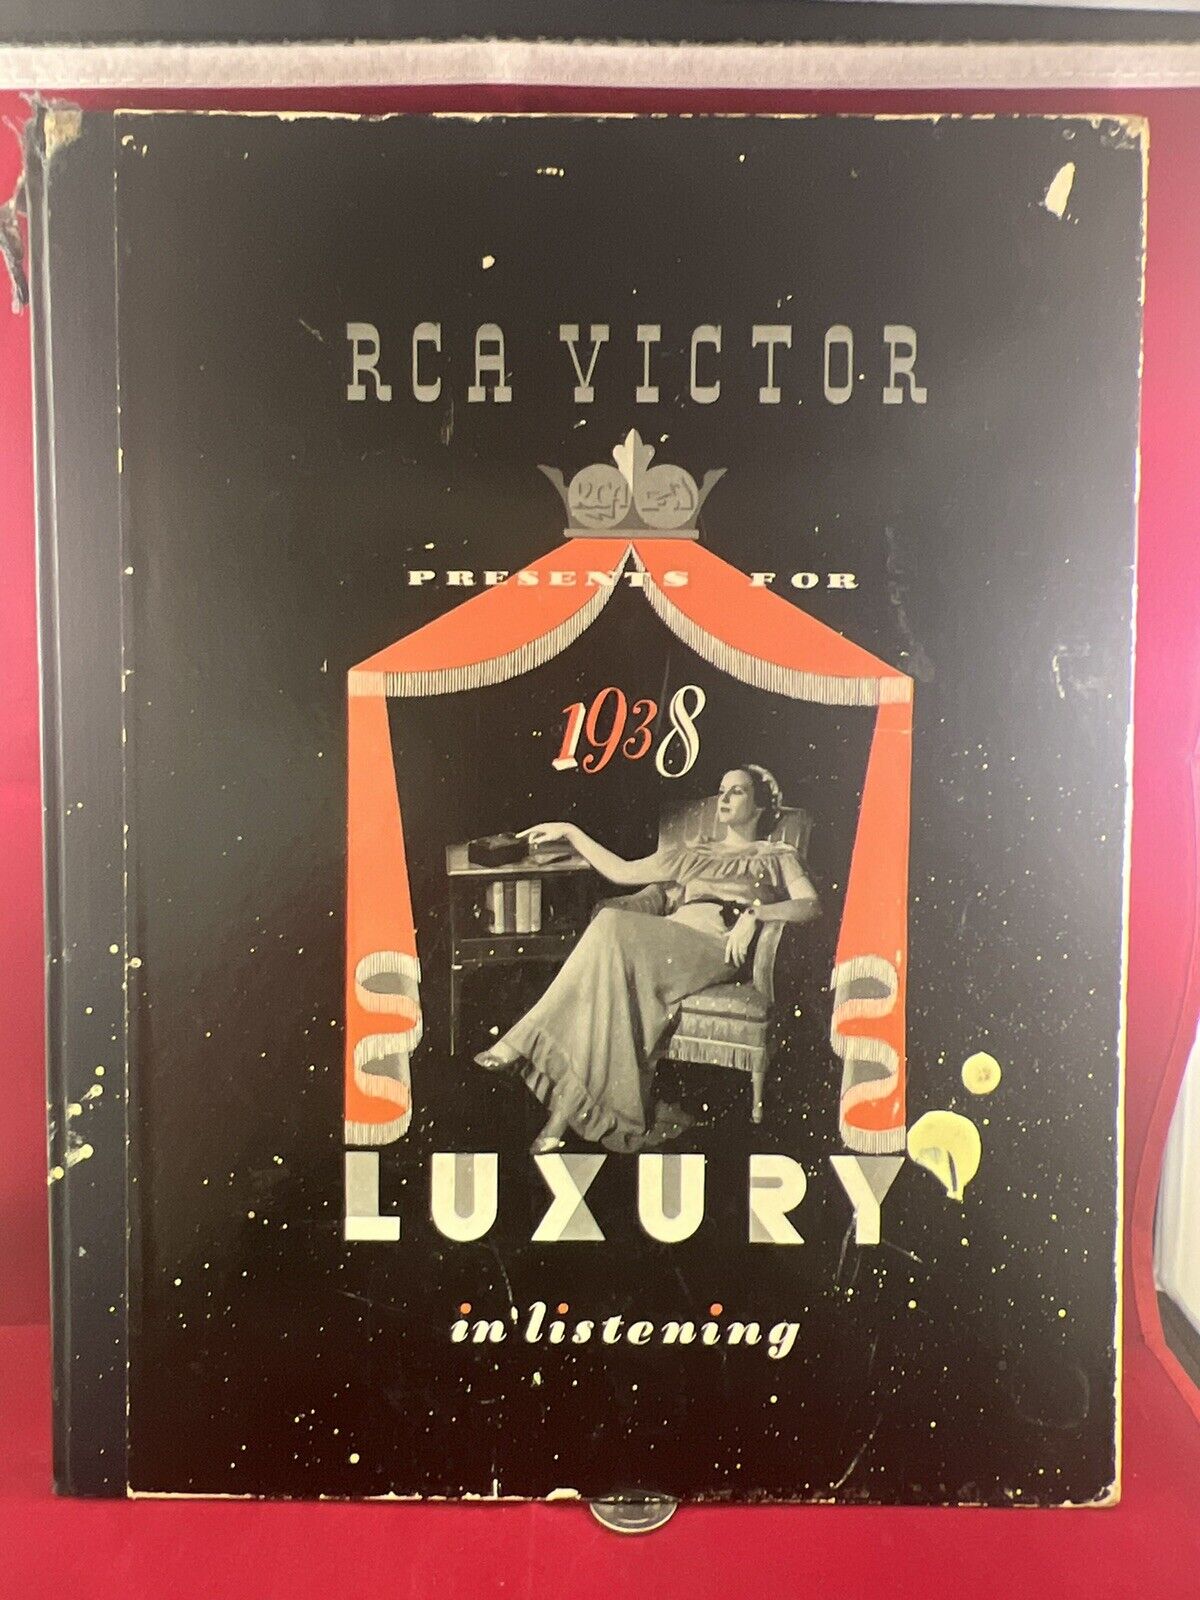 RCA VICTOR PRESENTS FOR 1938 CATALOG LUXURY IN LISTENING HARD COVER 48 PAGES